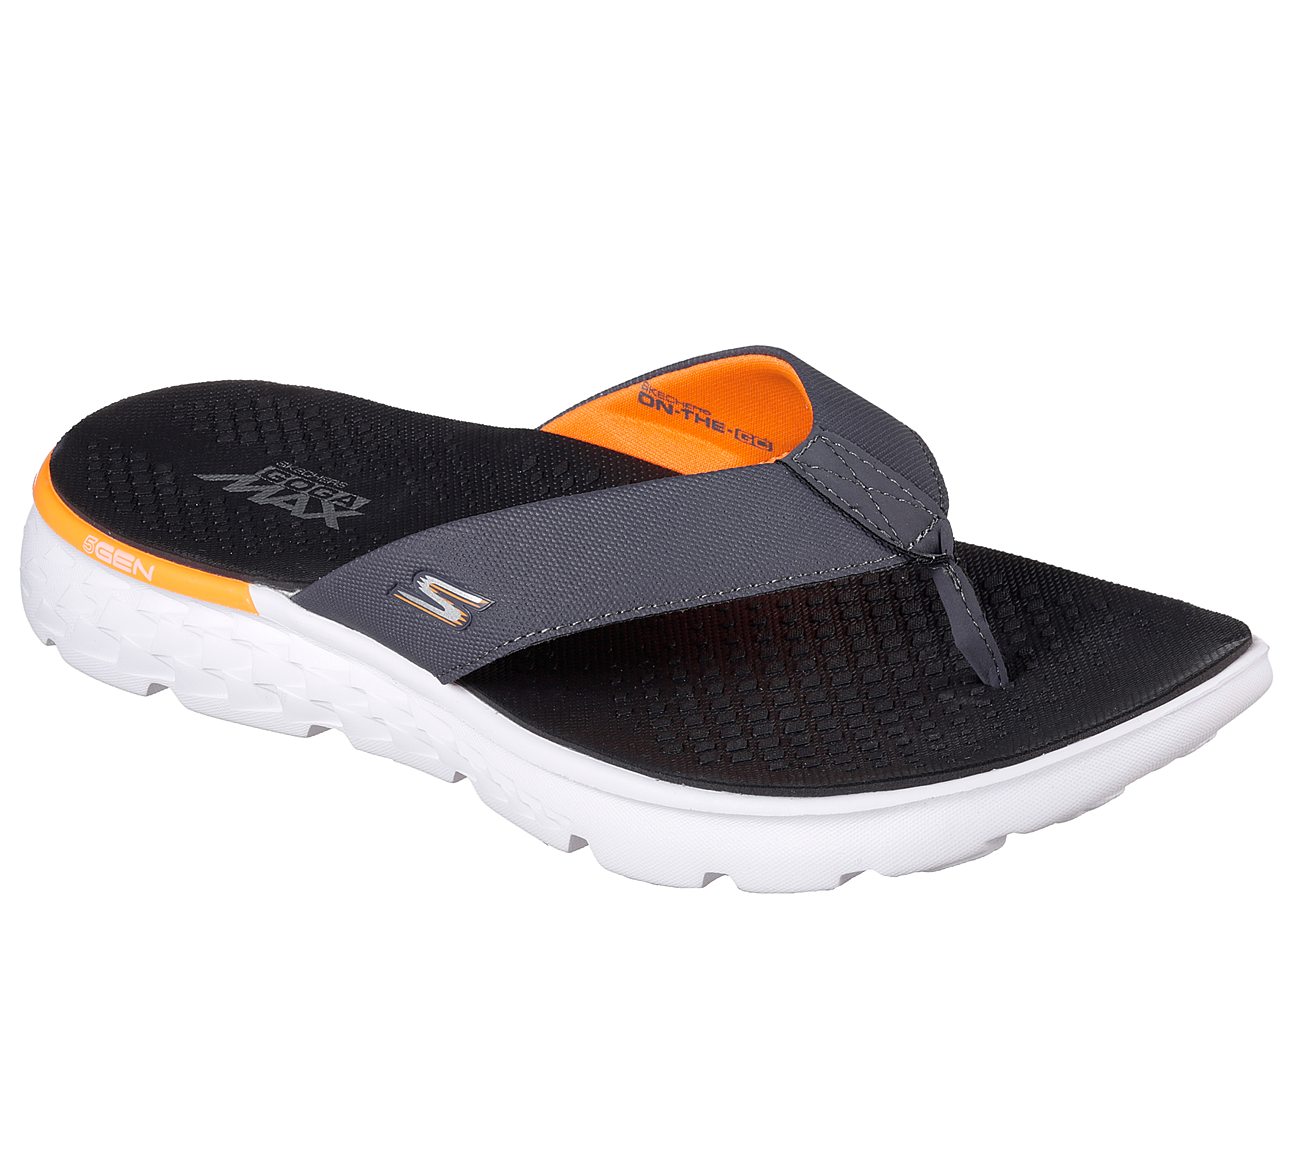 ON-THE-GO 400 - SHORE, CHARCOAL/ORANGE Footwear Lateral View